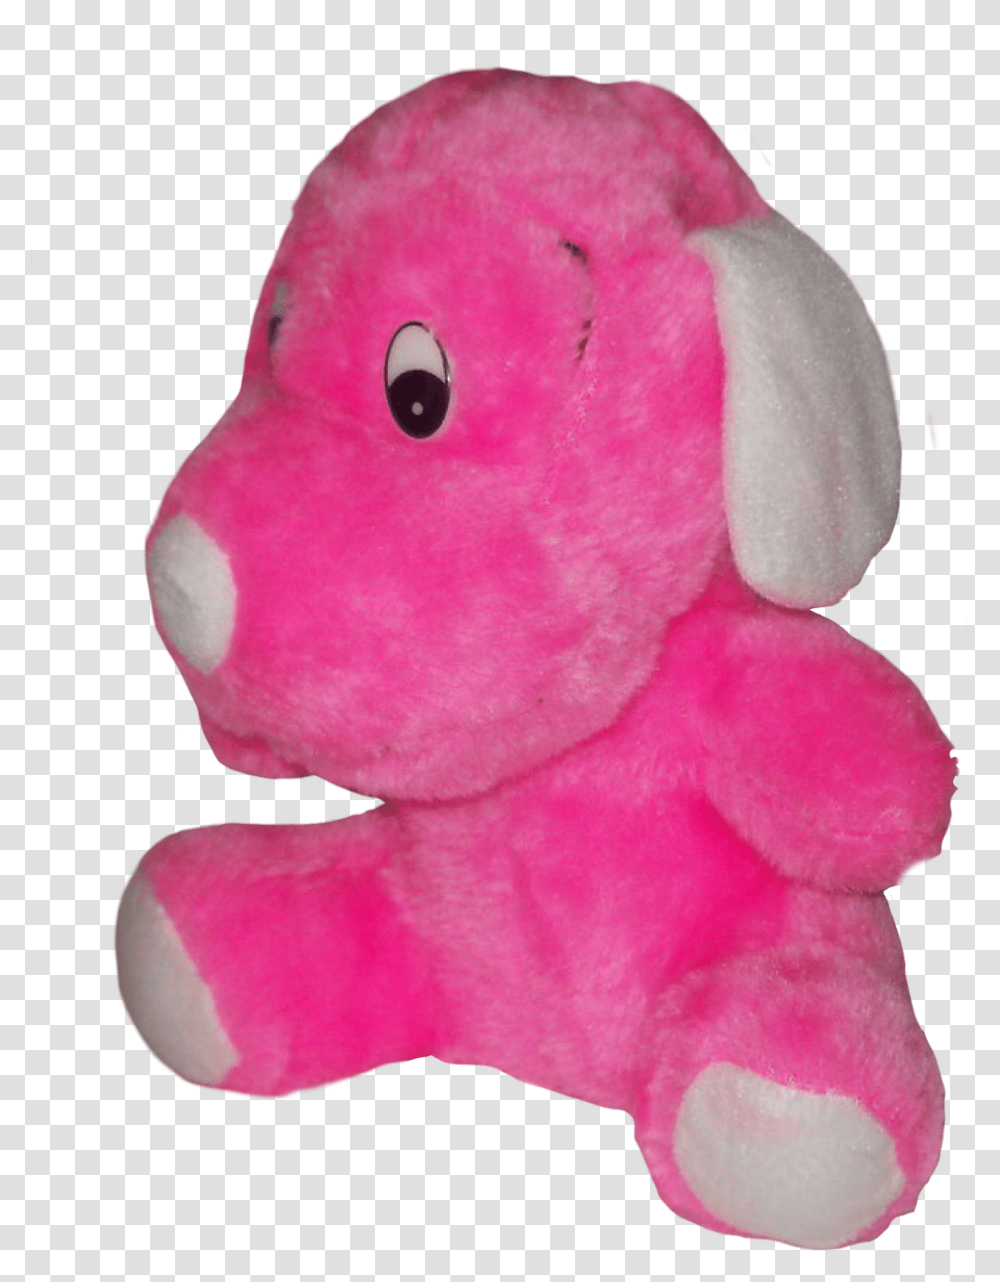 Toy Toycore Kidcore Pink Love Lovecore Babycore Stuffed Toy, Plush, Figurine, Cushion, Sweets Transparent Png